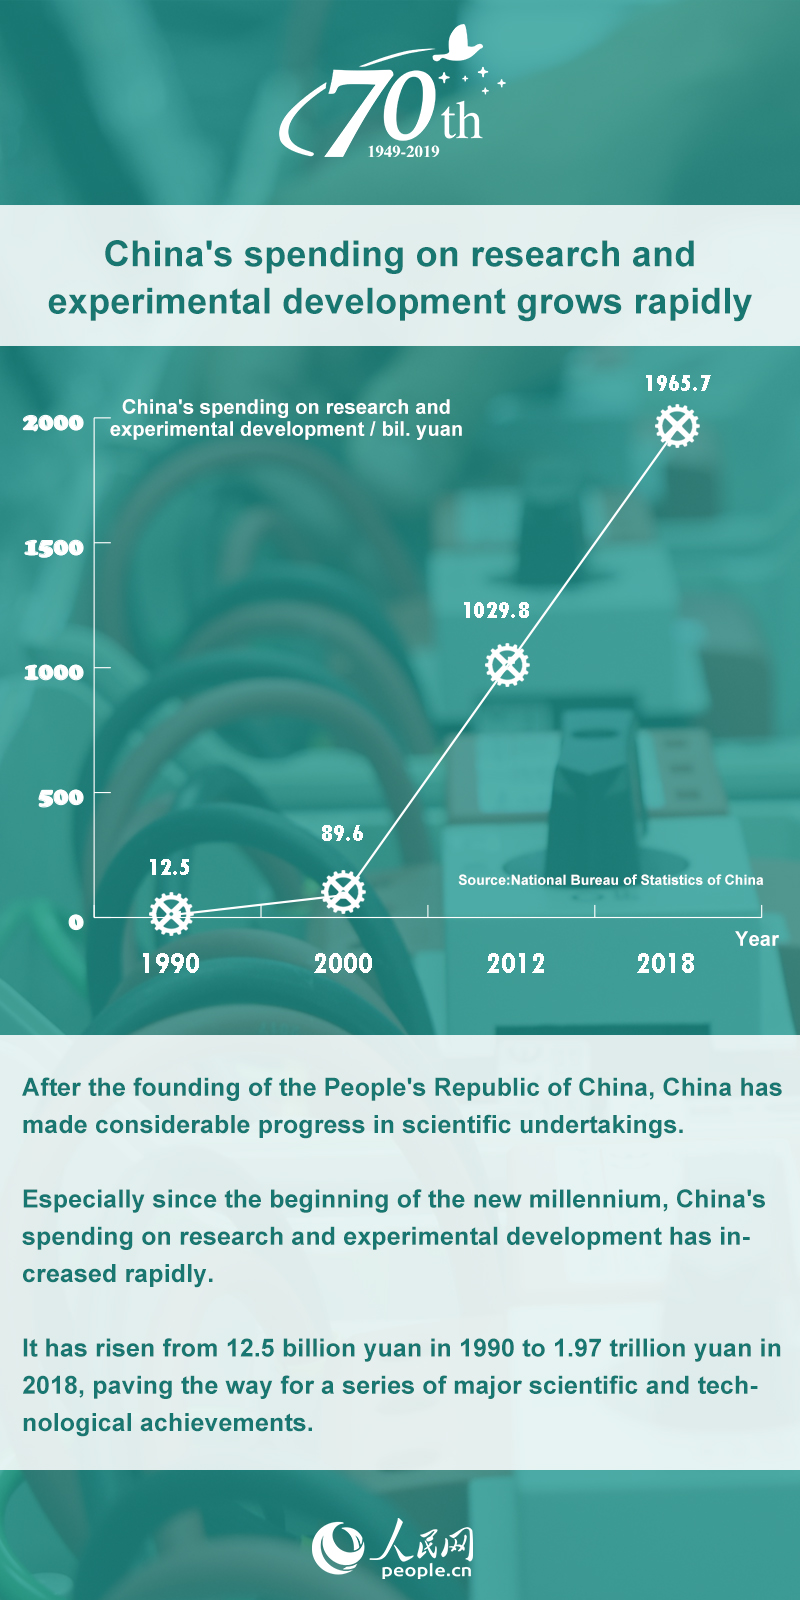 China in 70 years: China's spending on research and experimental development grows rapidly